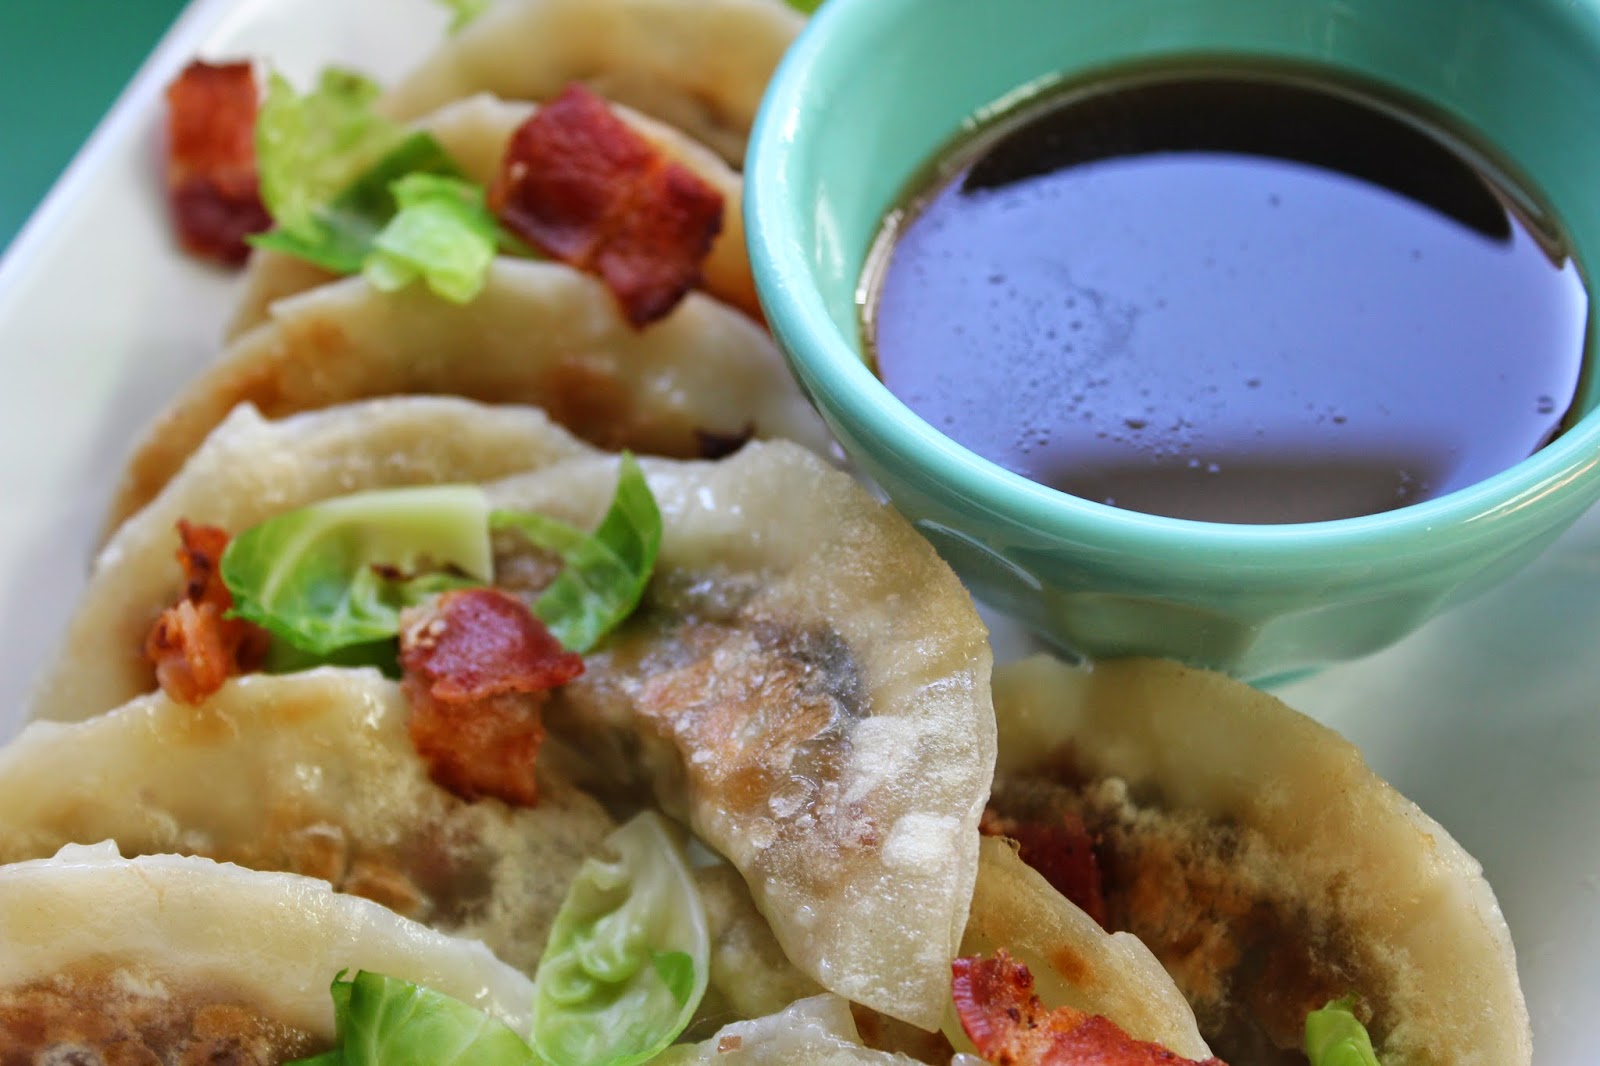 Brussels sprouts and bacon dumplings